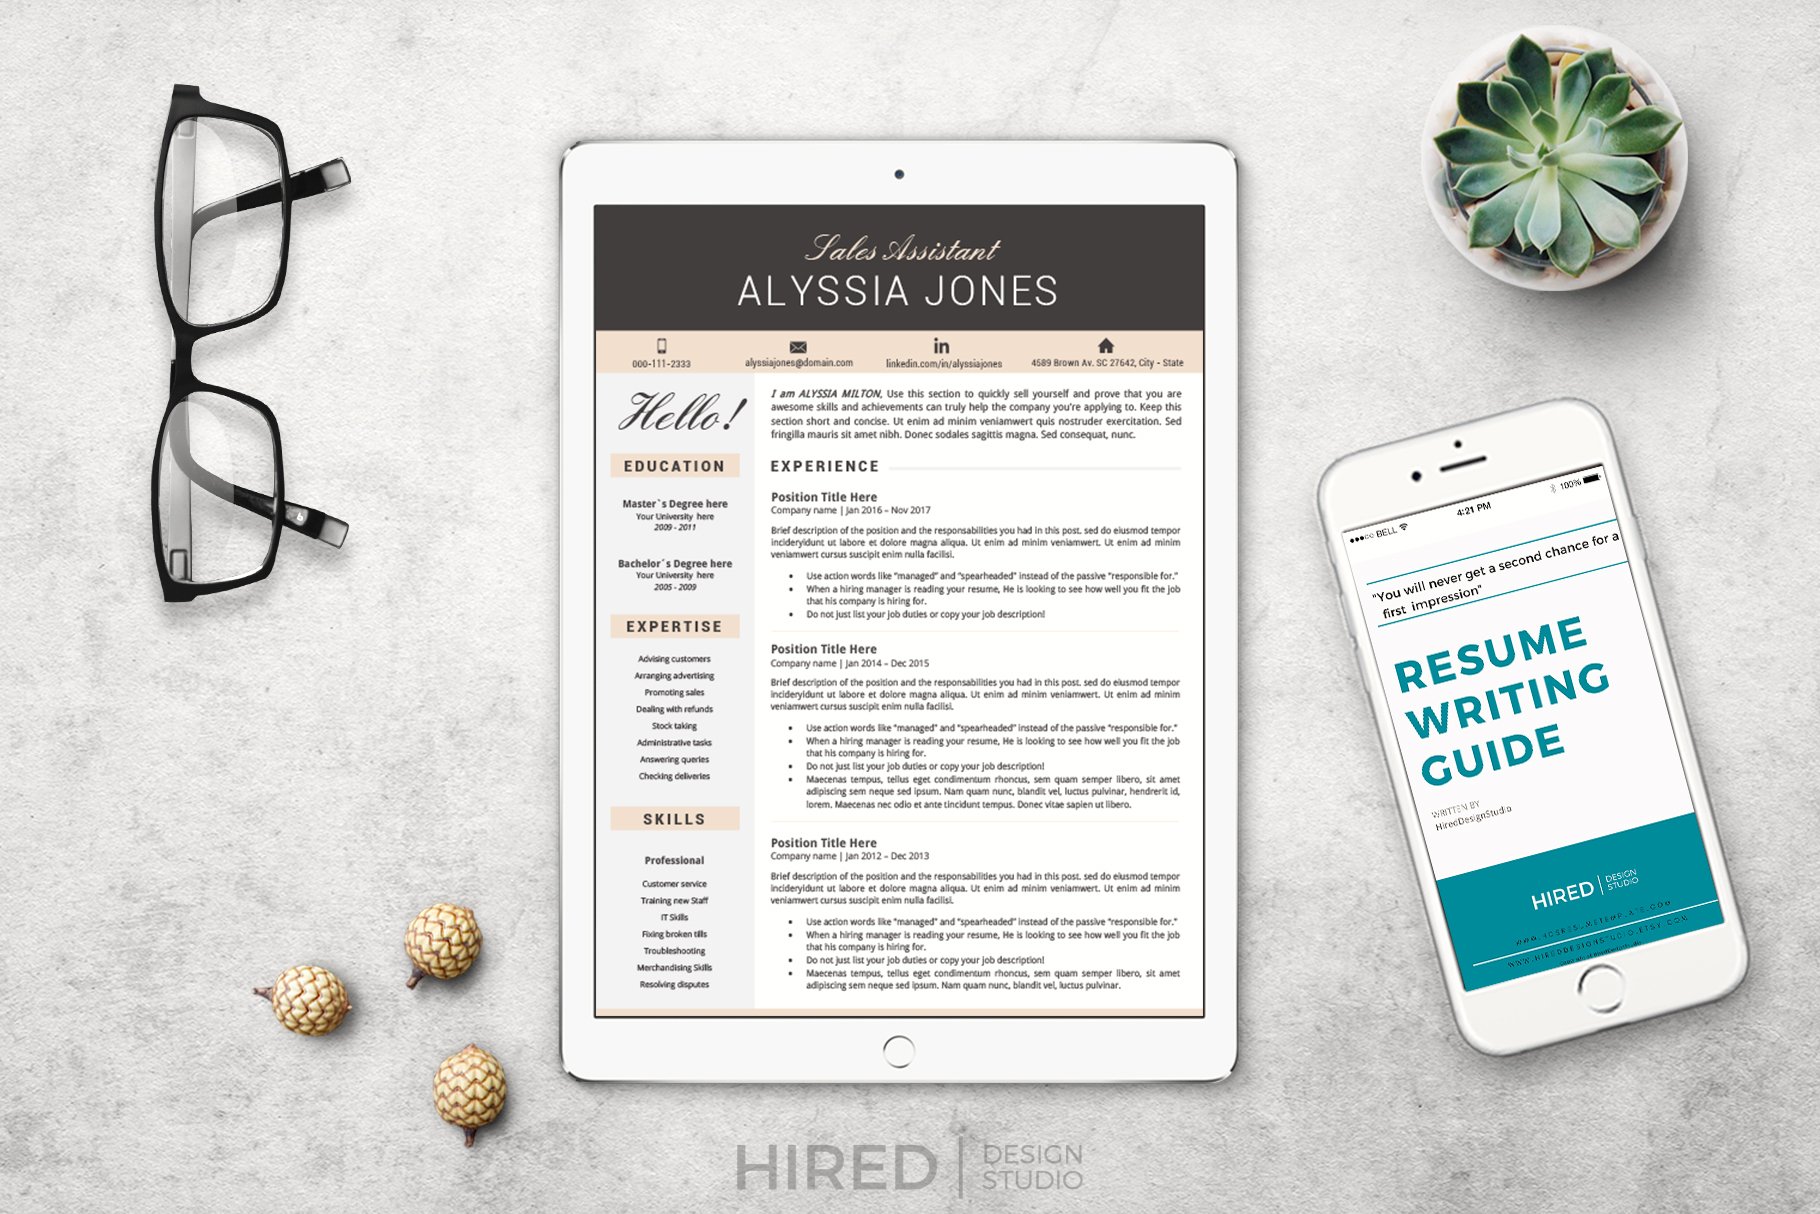 resume samples and resume wrinting guide career advice 147